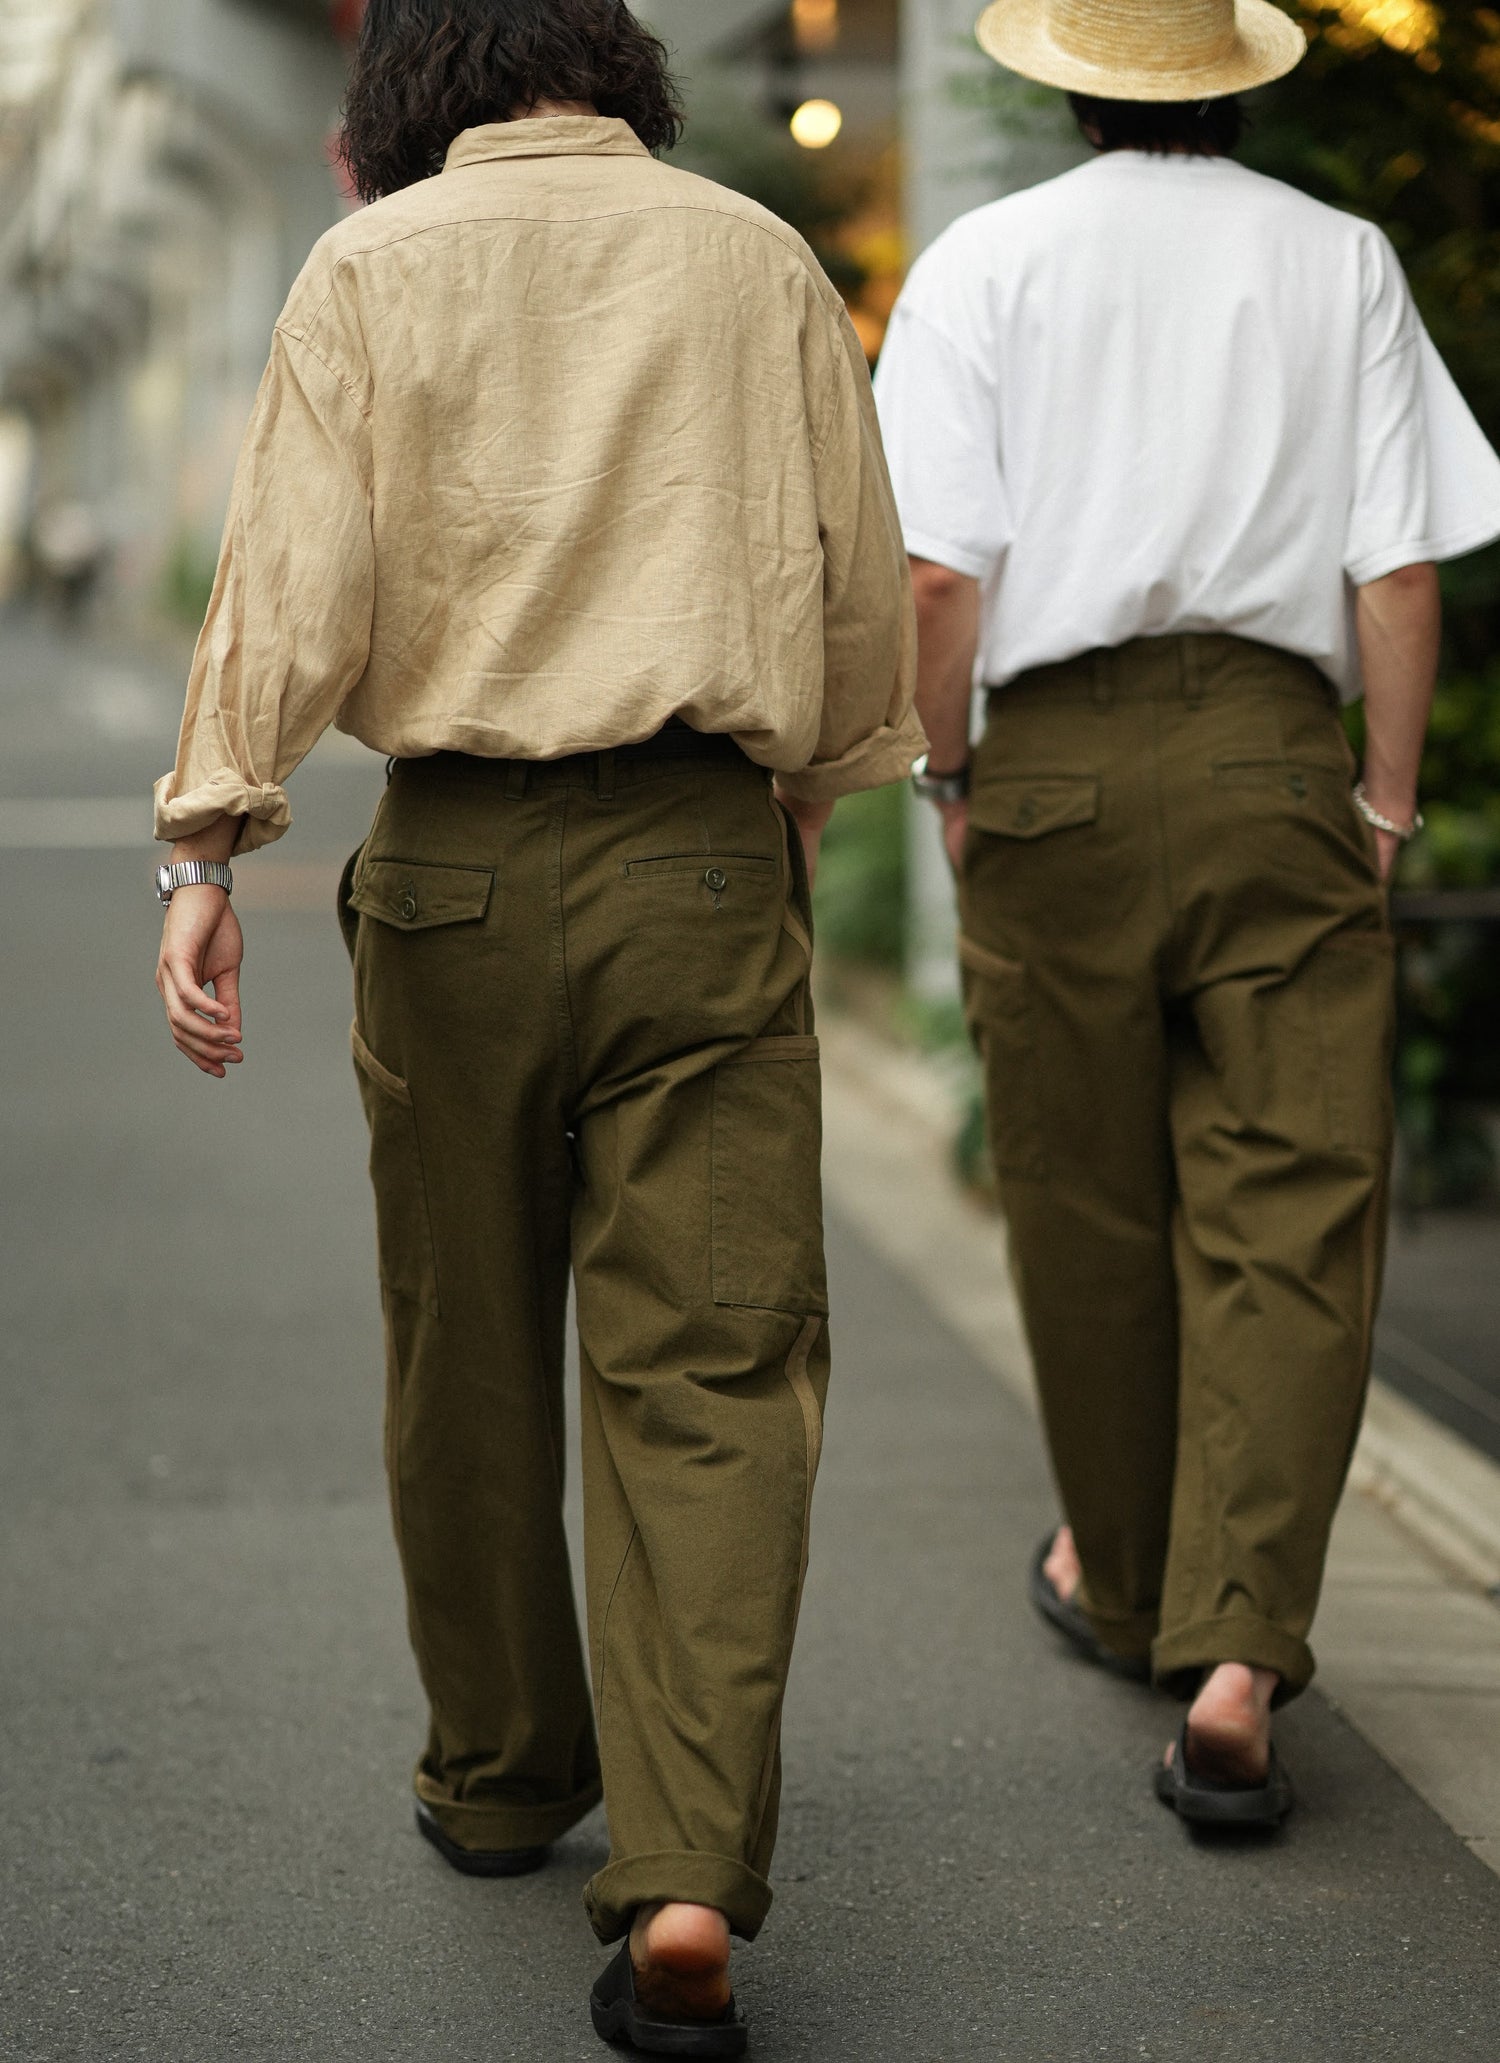 Transport Trousers - 運パン - VINTAGE TWILL